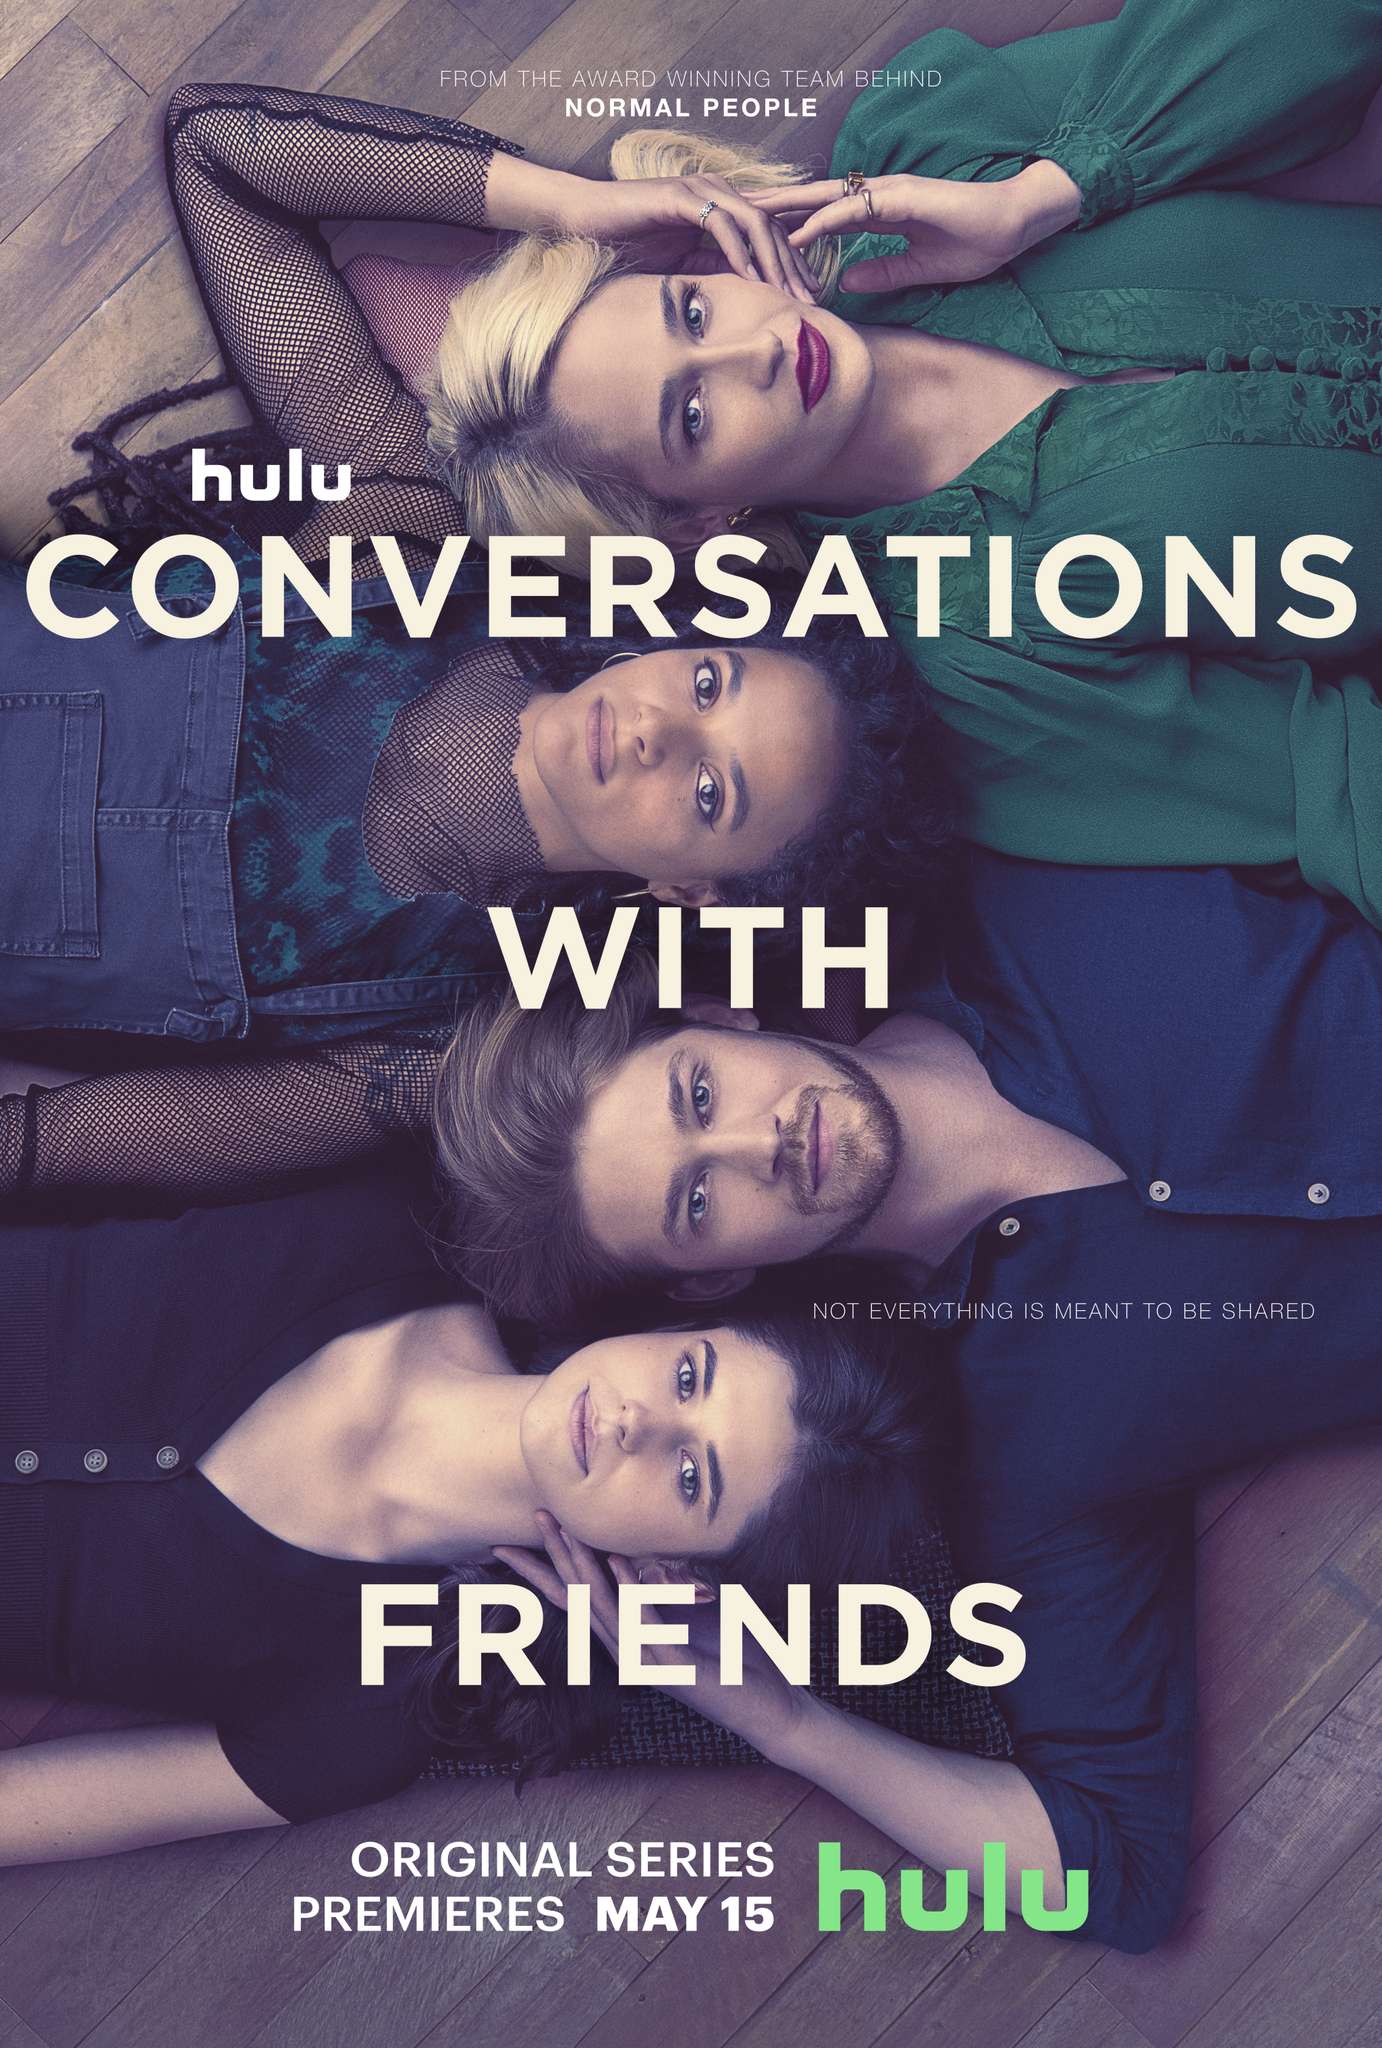 Is Conversations with Friends available on Hulu